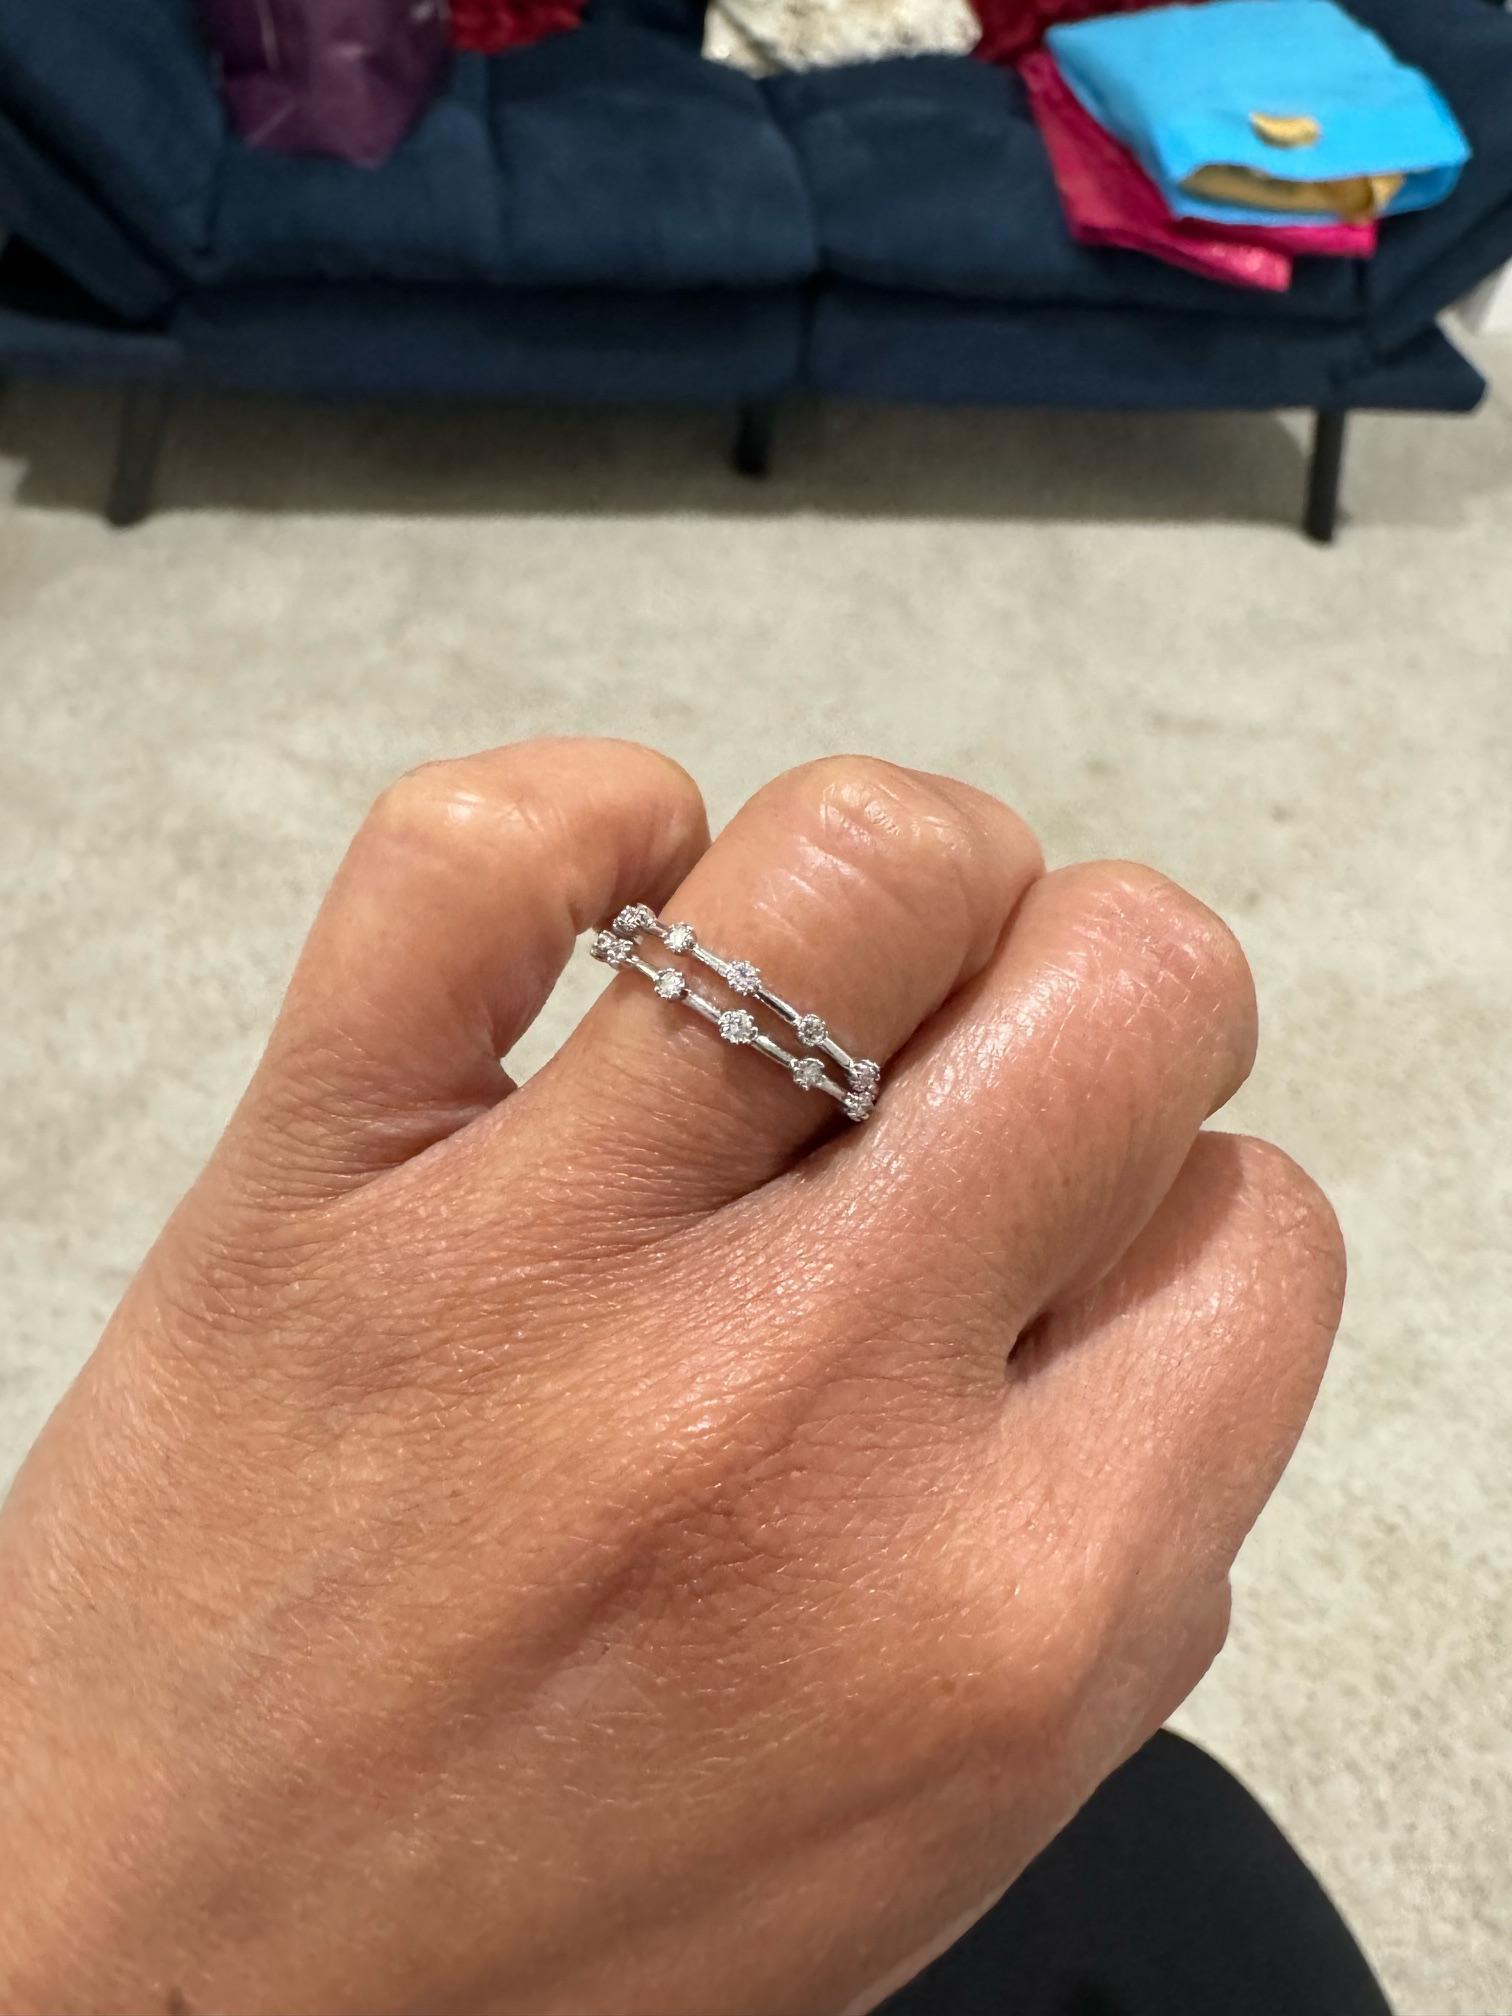 0.25 Carat Diamond Set of 2 White Gold Bands

These 2 bands have a total of 12 Round Cut Diamonds that weigh 0.25 carats.  Clarity is SI2 and Color is F
Curated in 14K White gold	
These are great to stack between other bands and rings or wear by